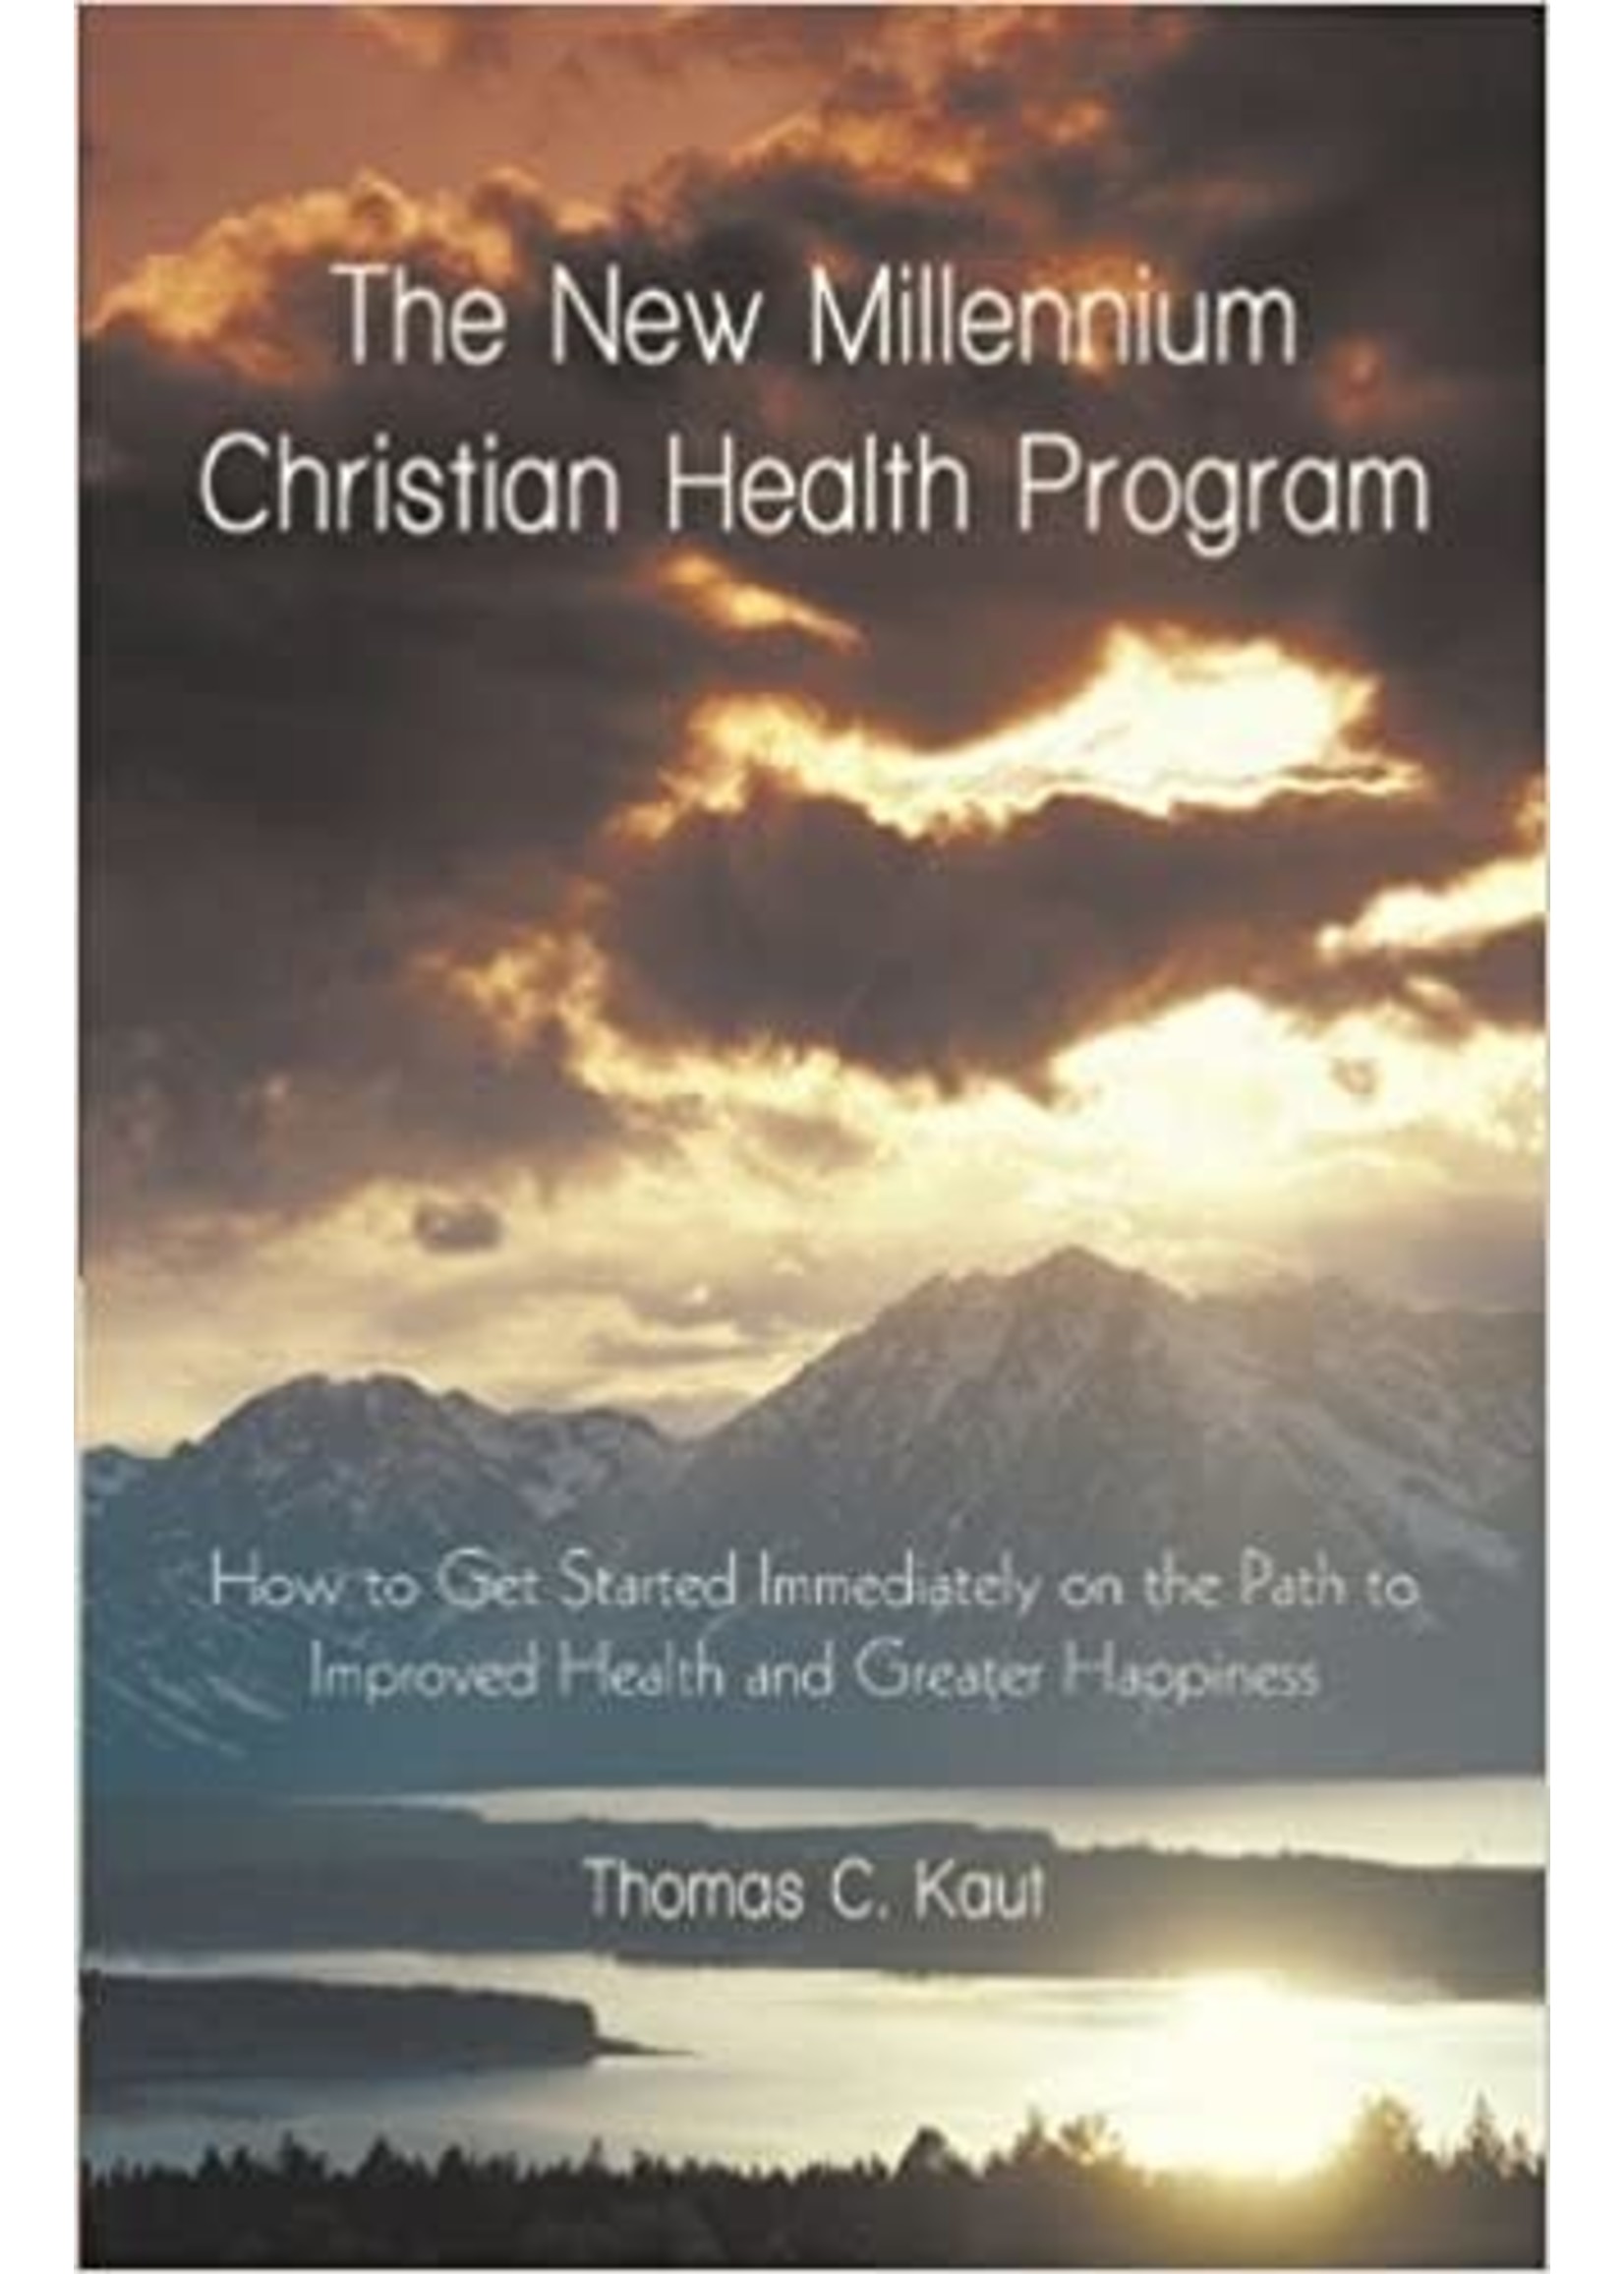 The New Millennium Christian Health Program: How to Get Started Immediately on the Path to Improved Health and Greater Happiness